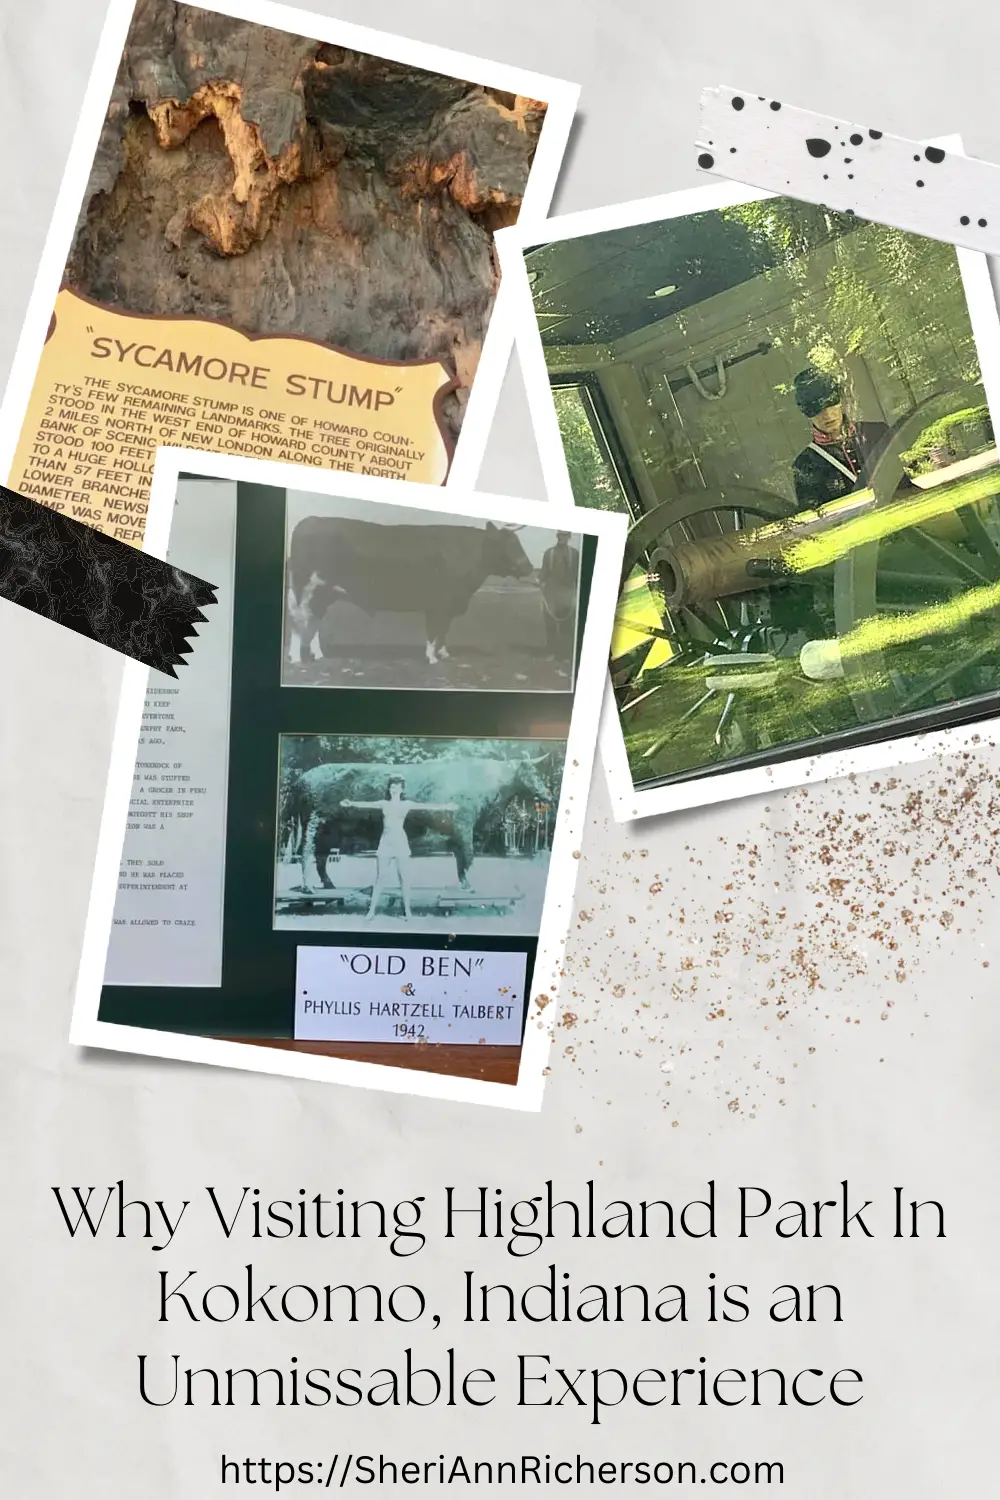 Images taken at Highland Park including old Ben, the canon and the sycamore stump.